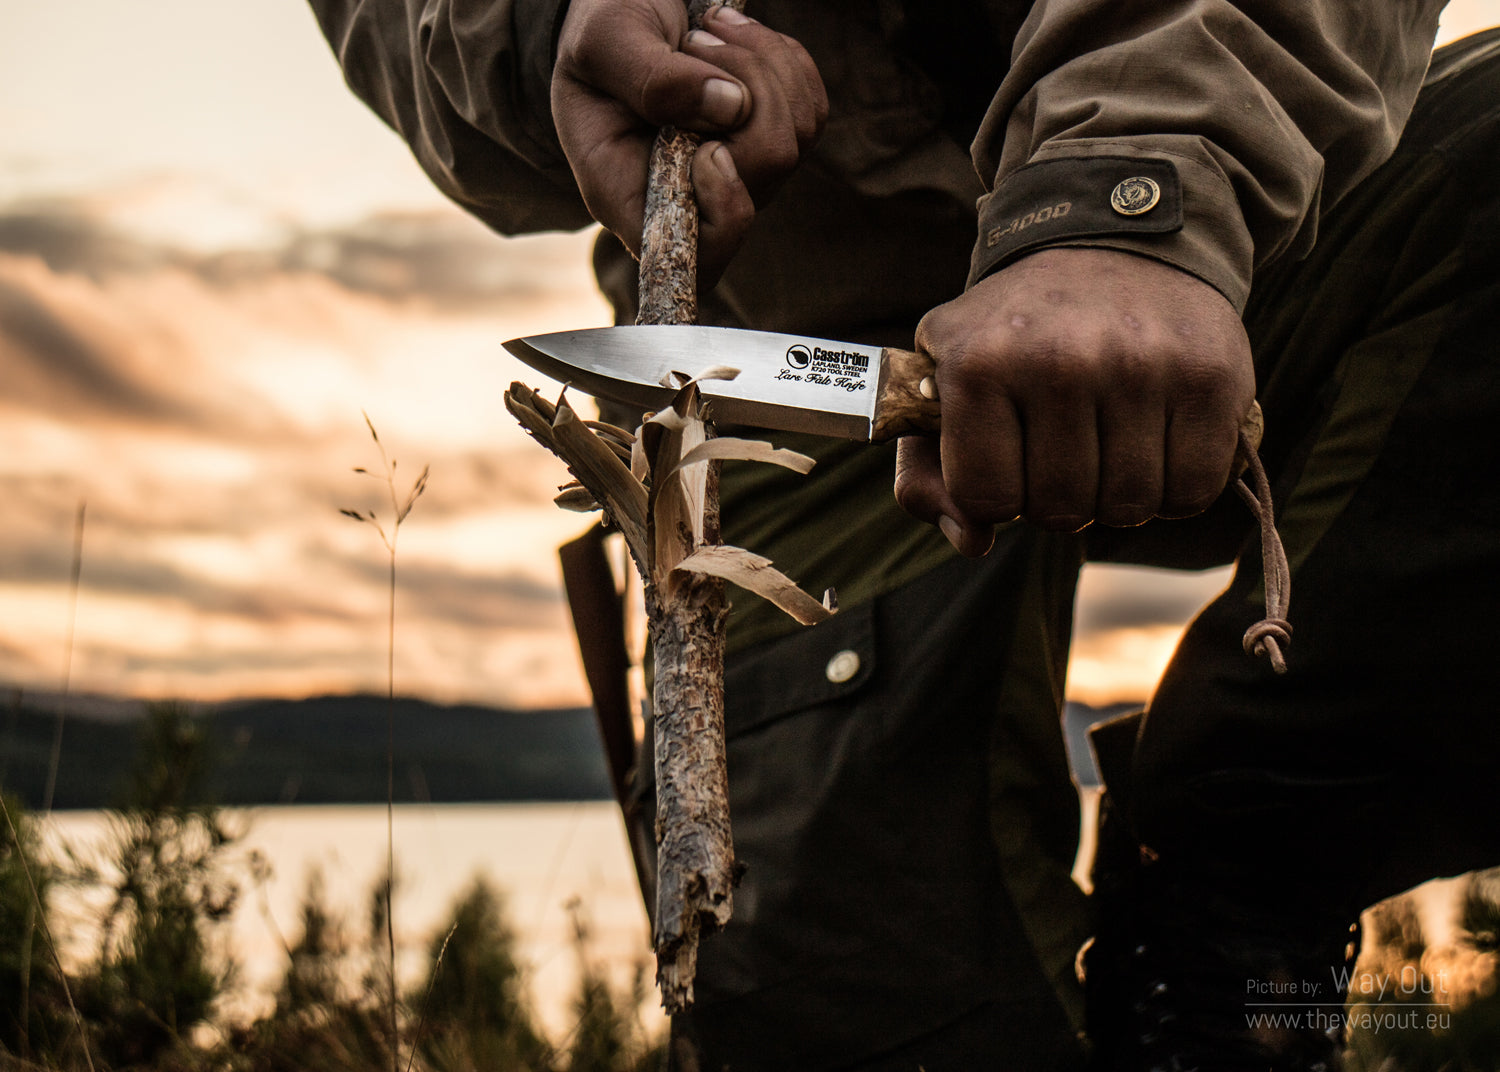 Using the Lars Fält knife in a wilderness setting, cutting a piece of wood